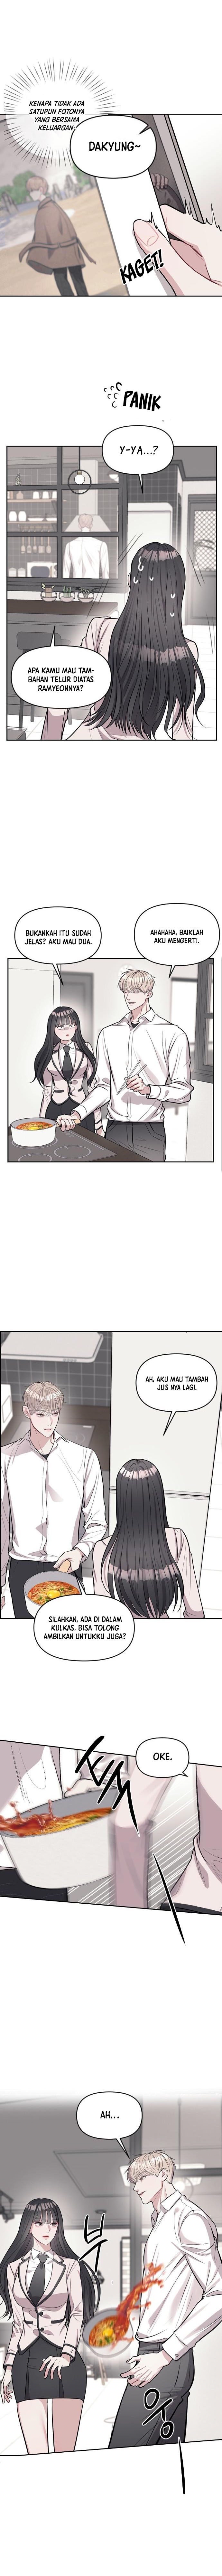 Undercover! Chaebol High School Chapter 03 - 185